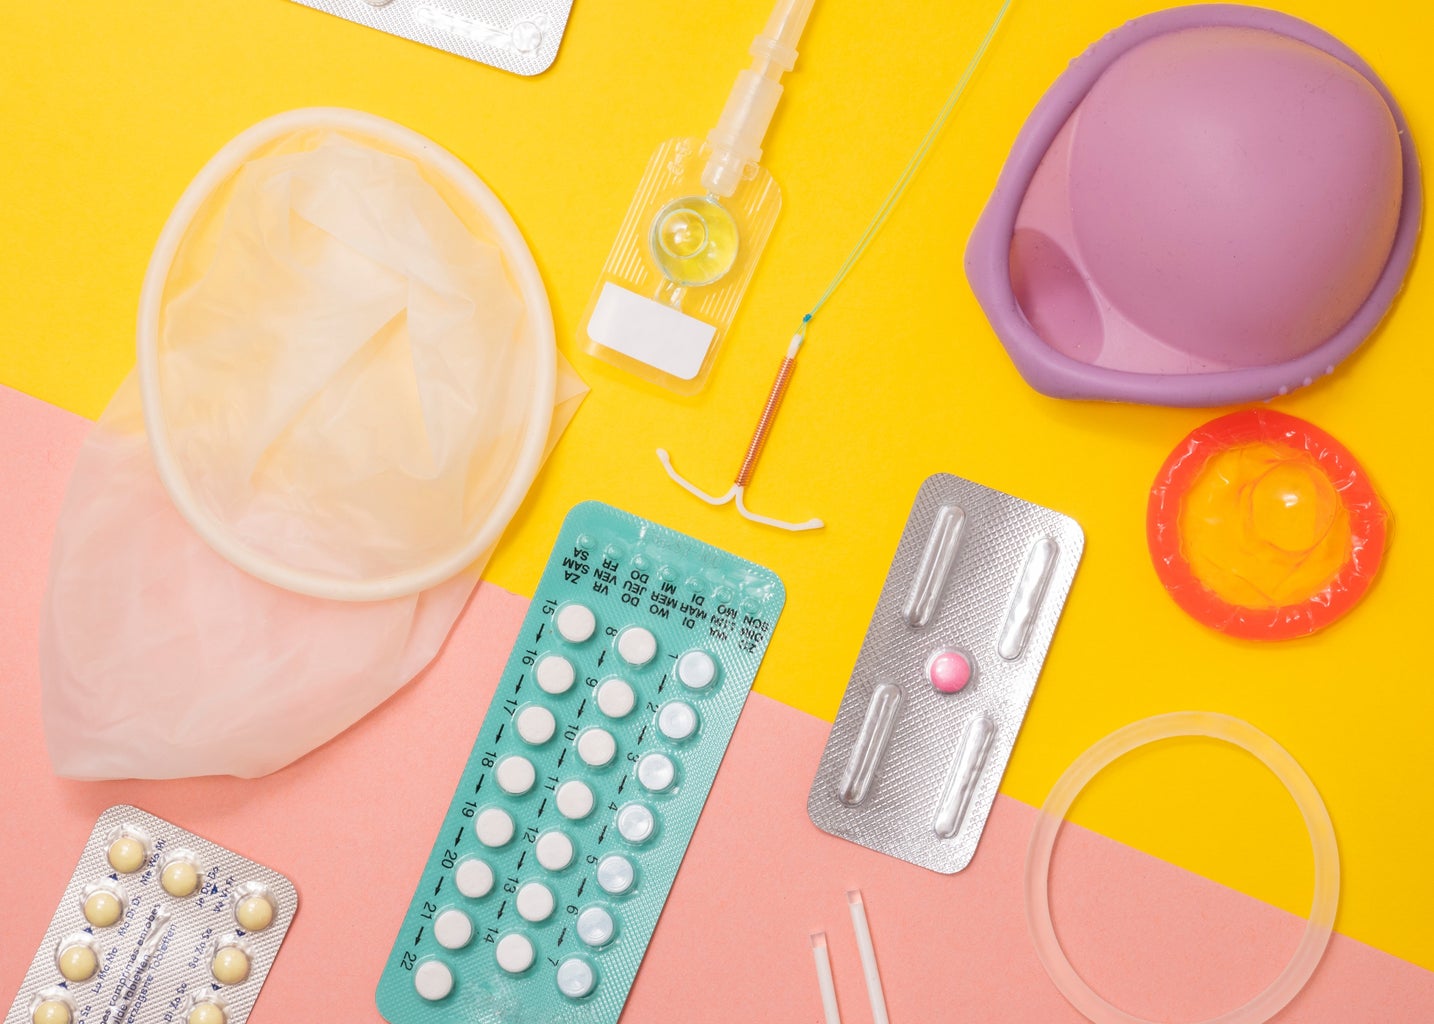 birth control methods against pink and yellow background